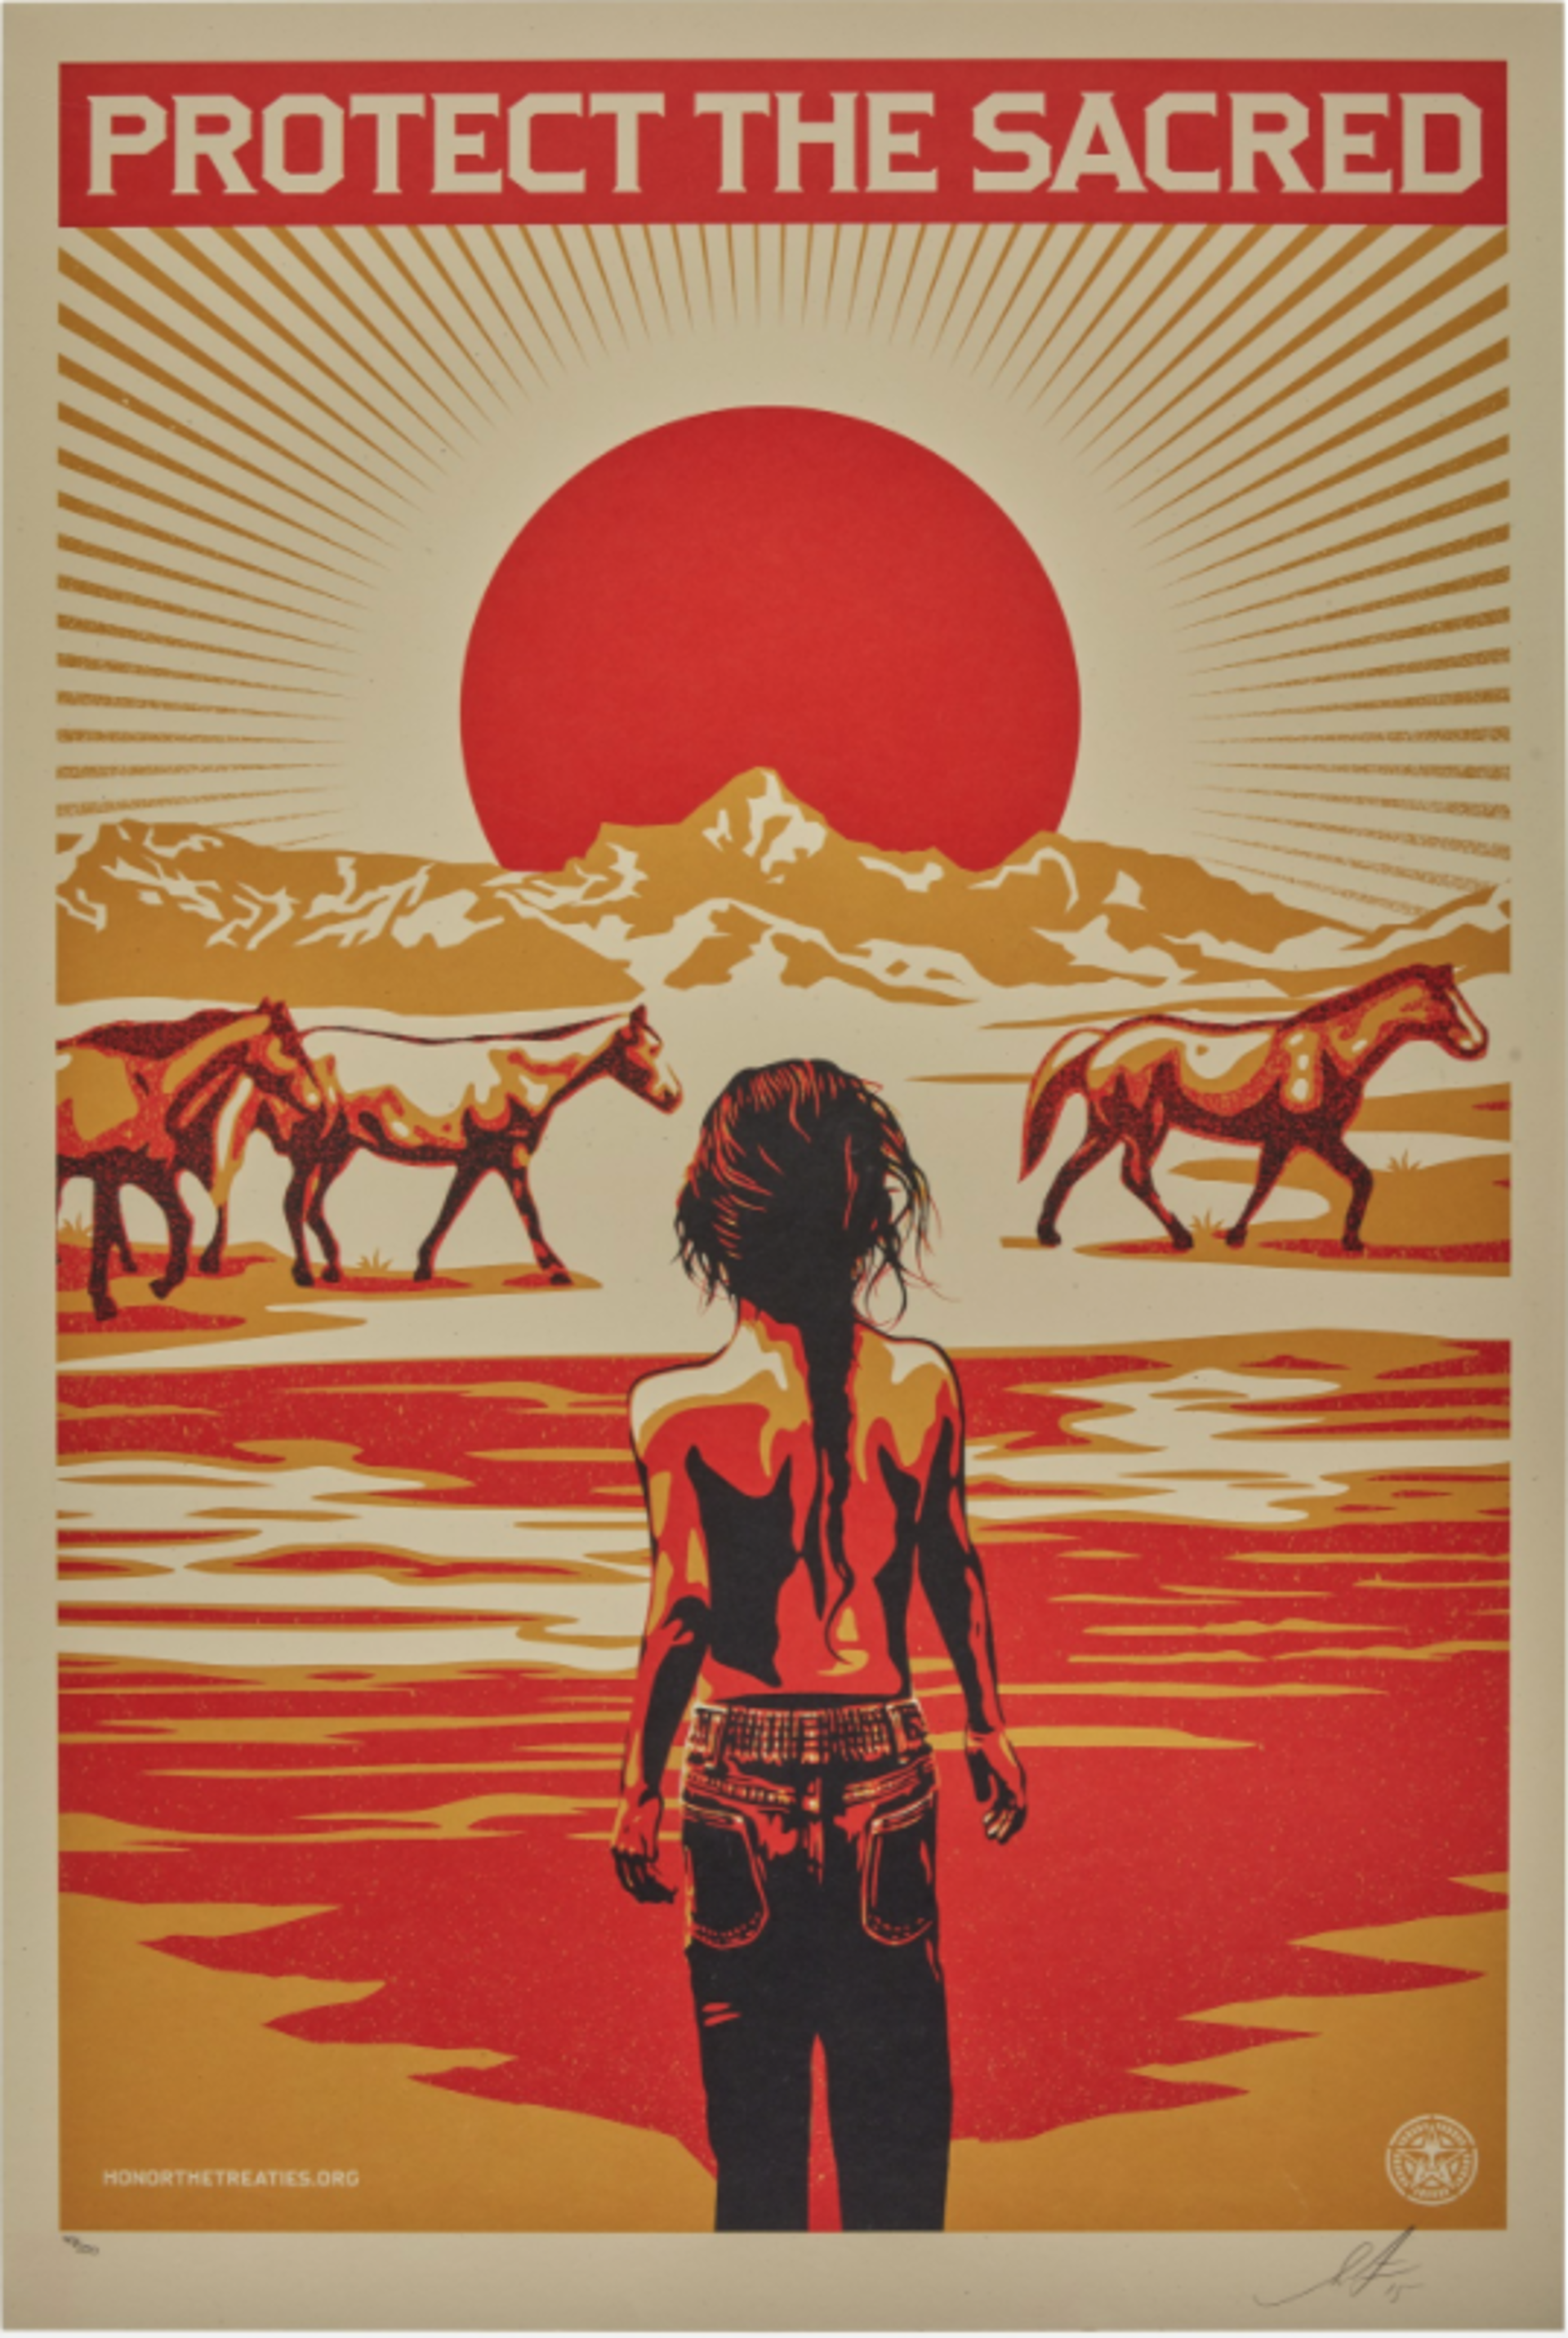 Protect the Sacred Offset Poster (40/200) by Shepard Fairey